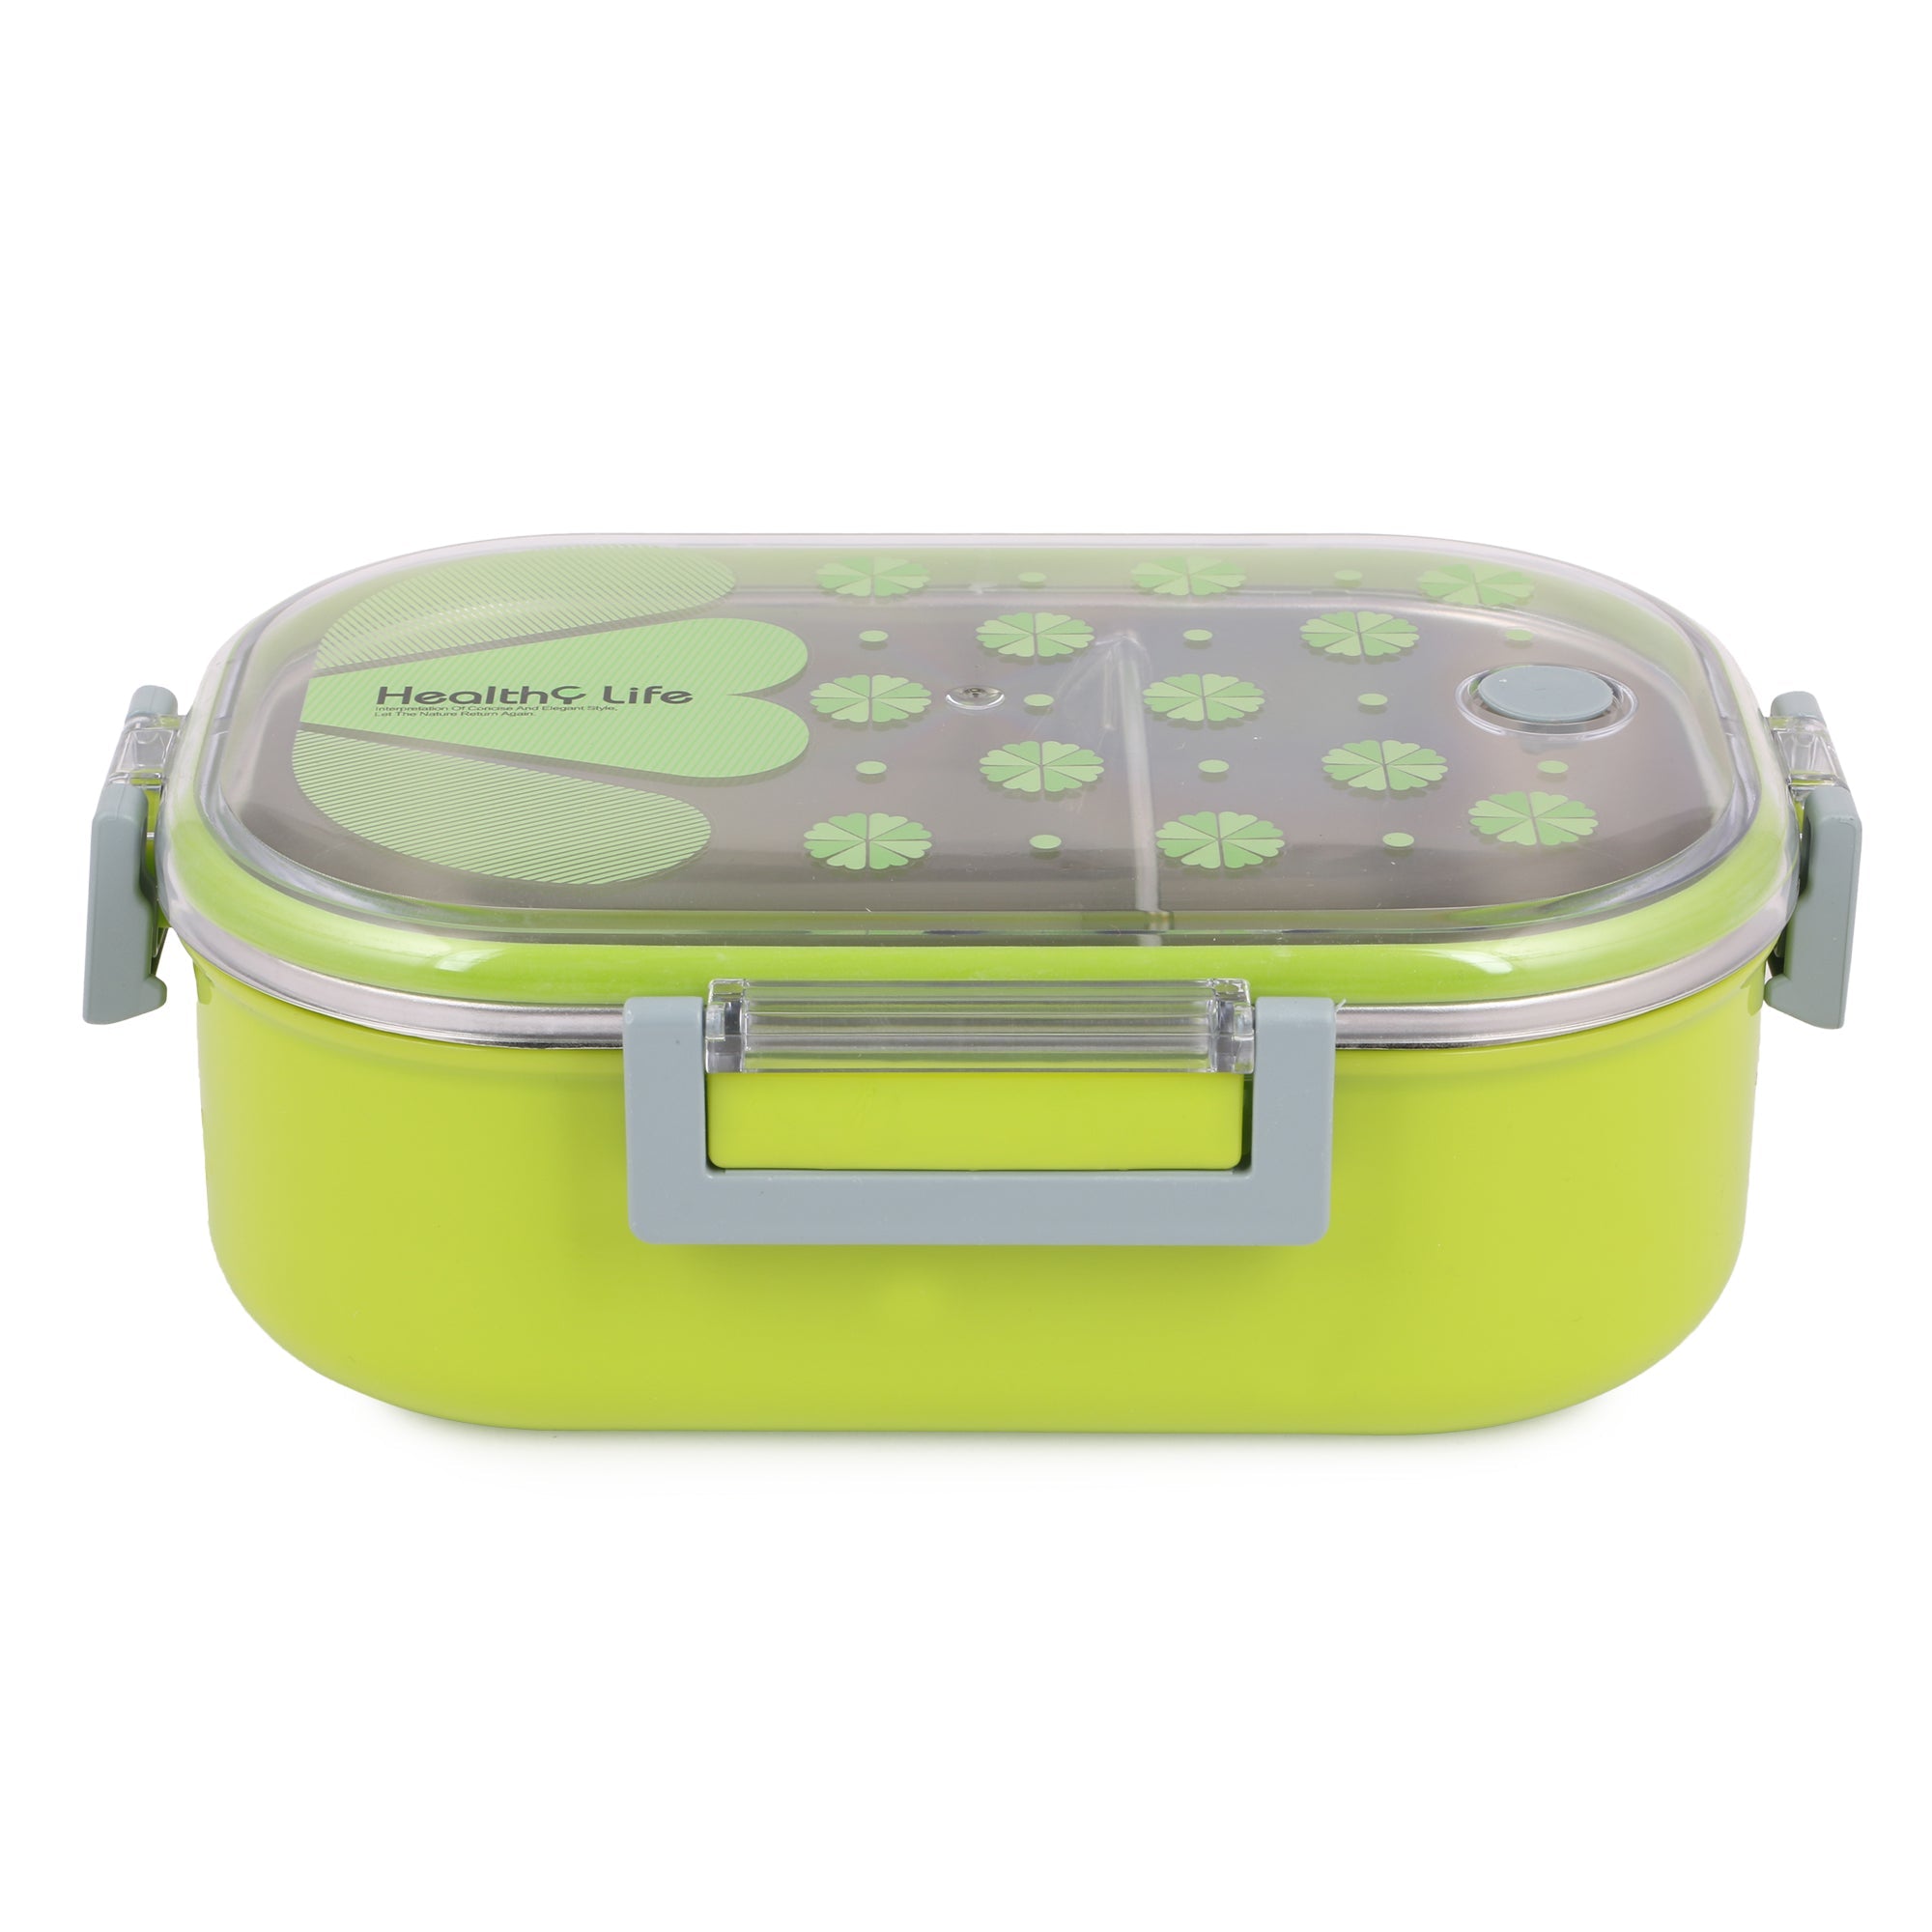 Stainless Steel Insulated 2 Grid Lunch Box Size: 6541 980ml